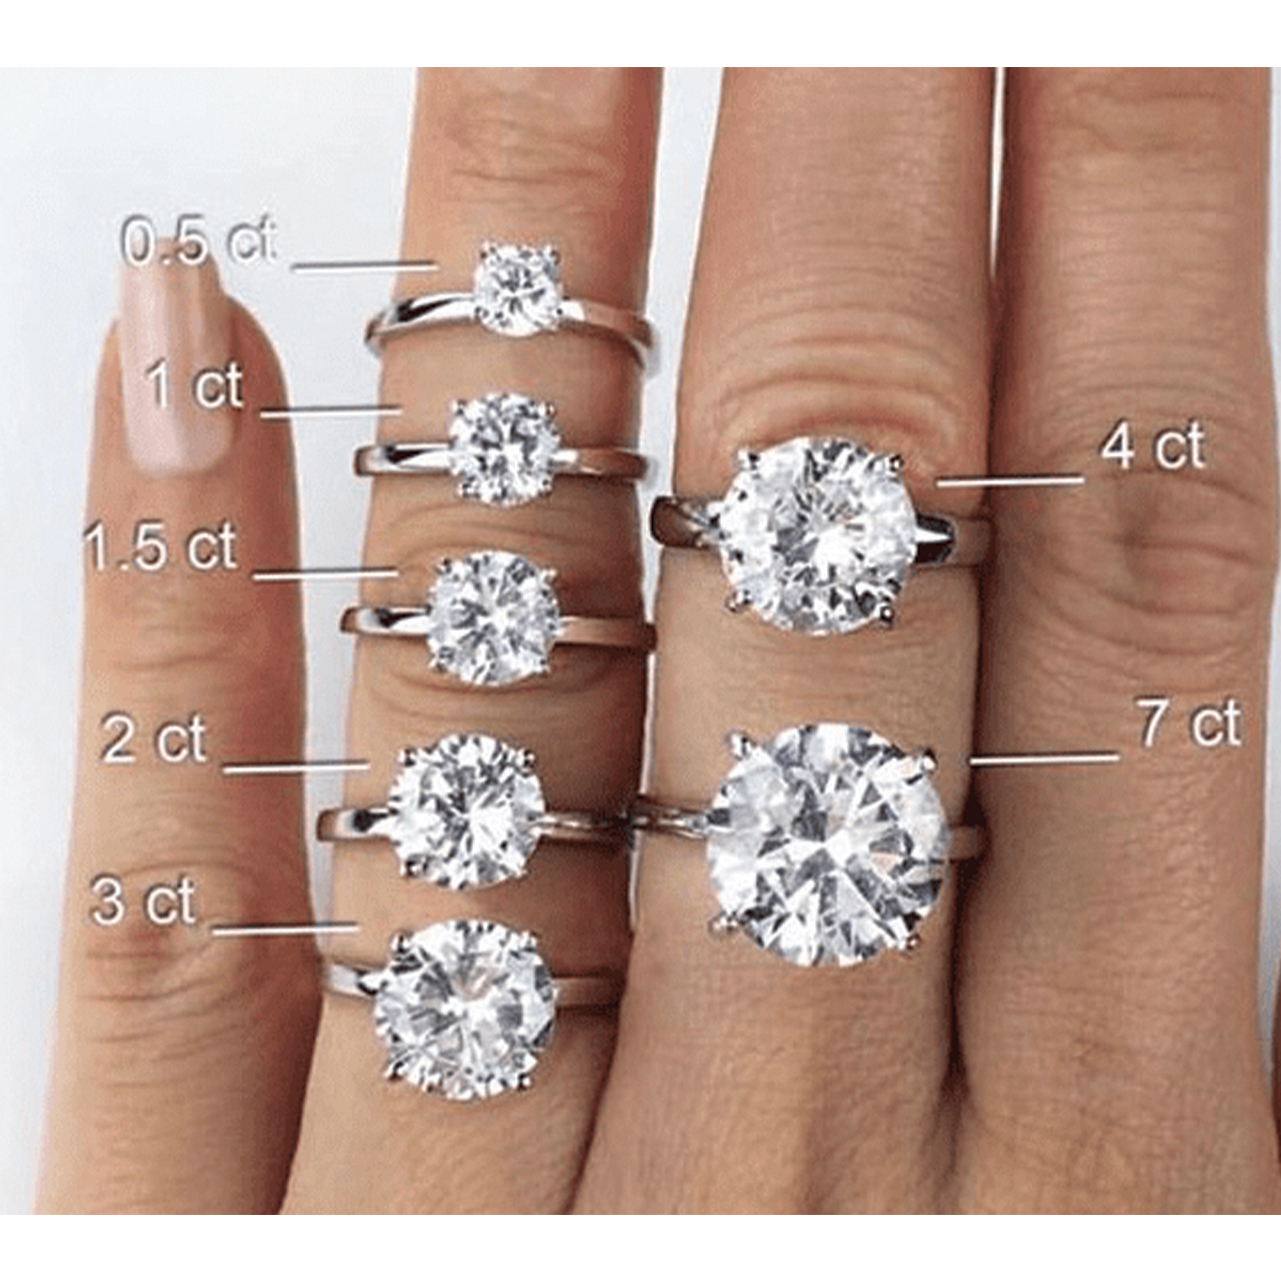 Geavanceerd Toeval Illustreren 6 Diamond Rings (By Actual Carat Size) At Levy Jewelers You Need To Try On!